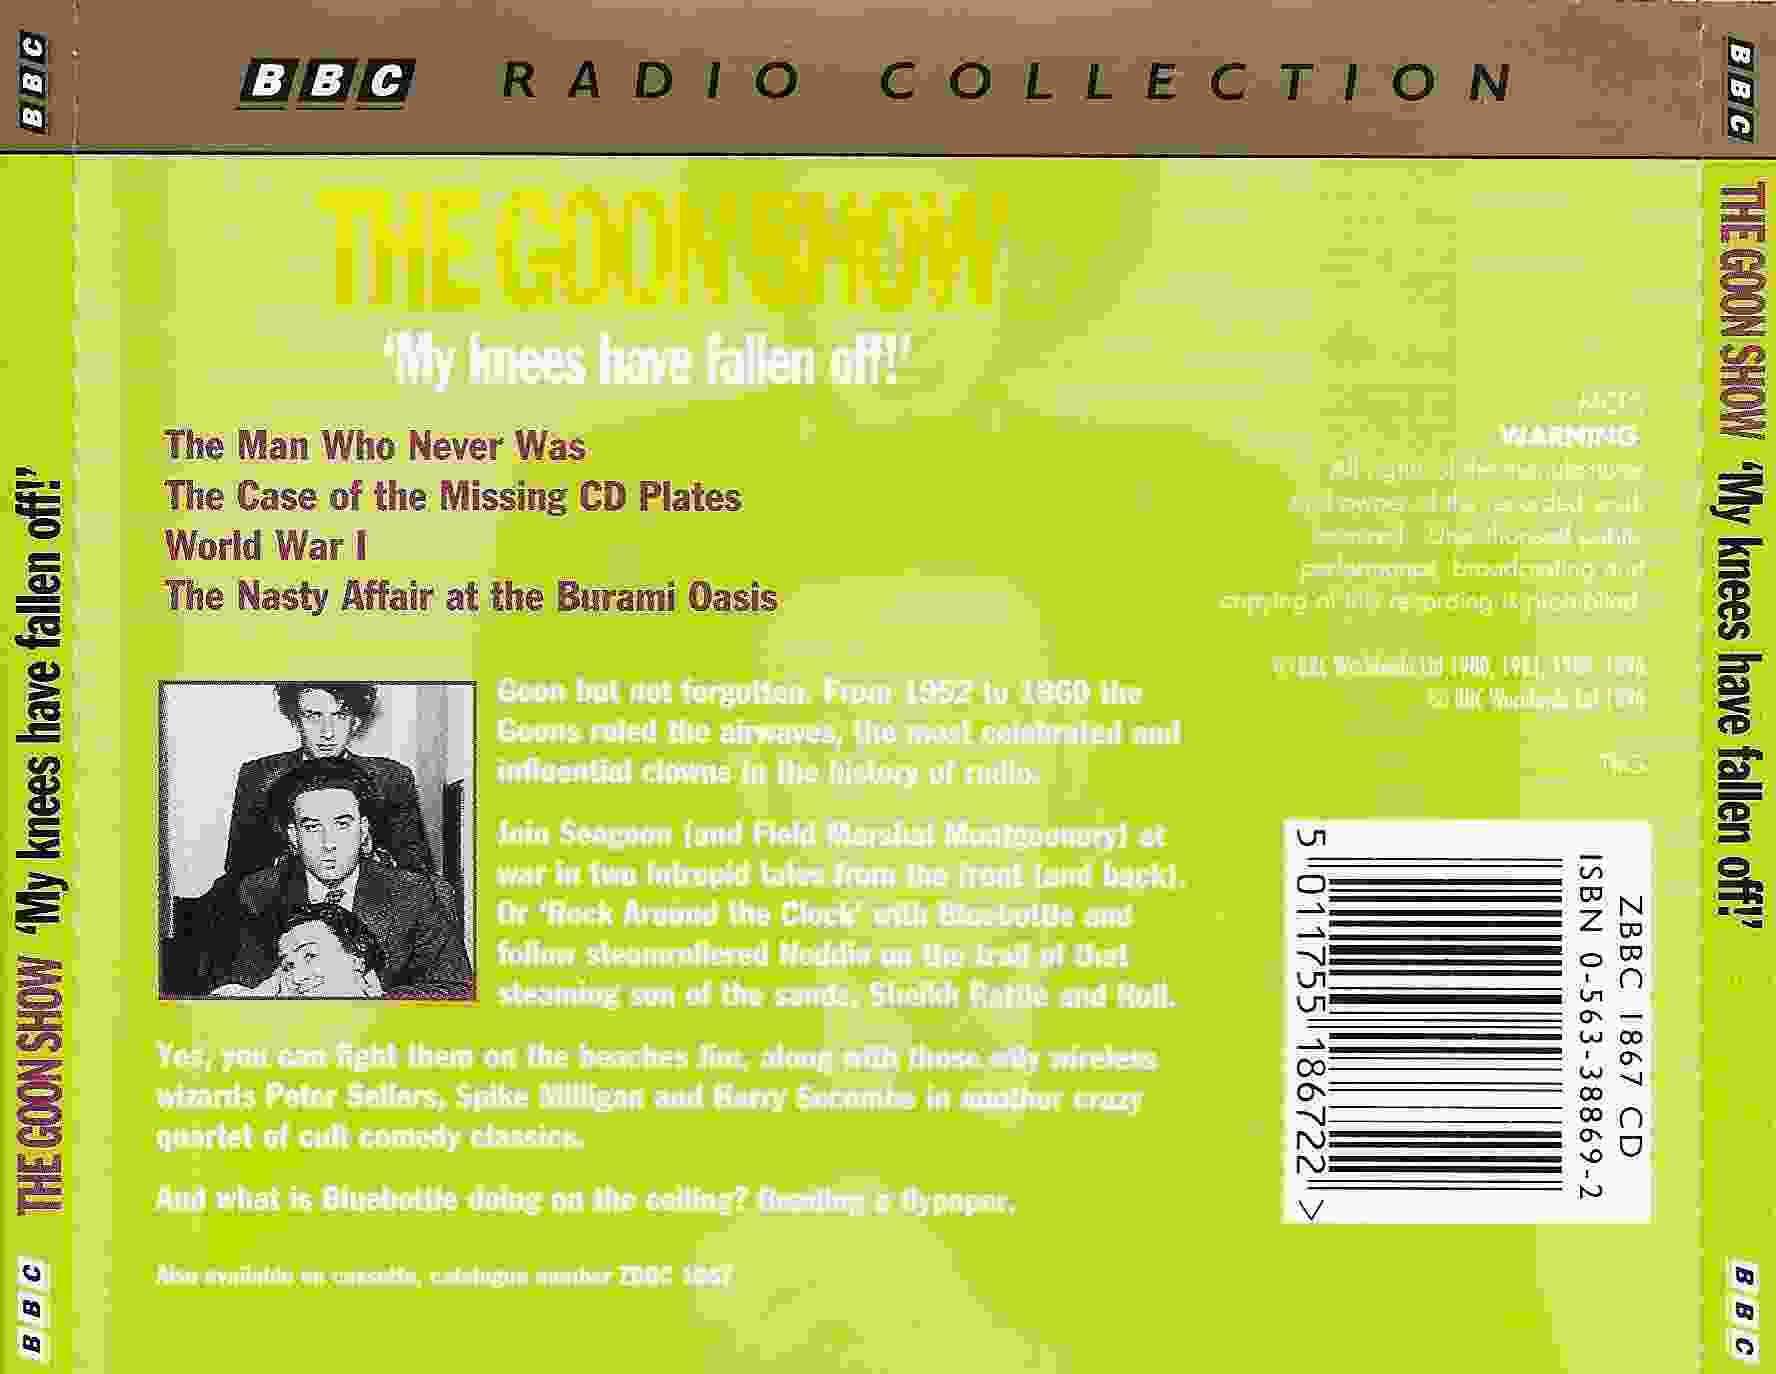 Picture of ZBBC 1867 CD The Goon show 4 - My knees have fallen off! by artist Spike Milligan / Larry Stephens from the BBC records and Tapes library